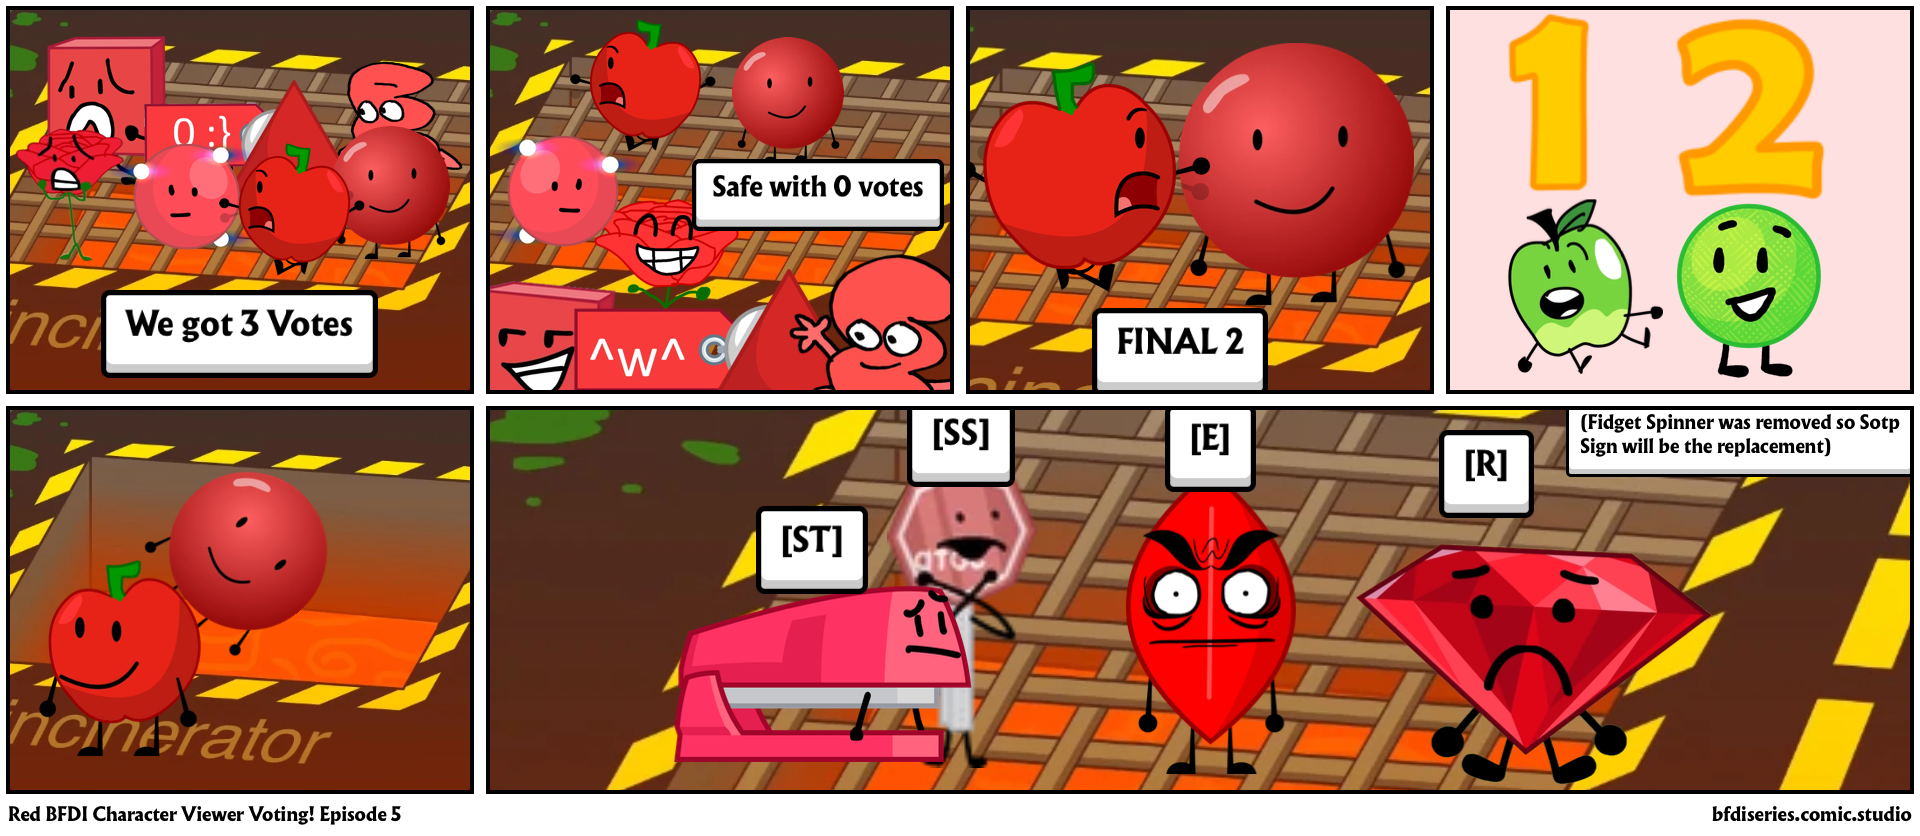 Red BFDI Character Viewer Voting! Episode 5